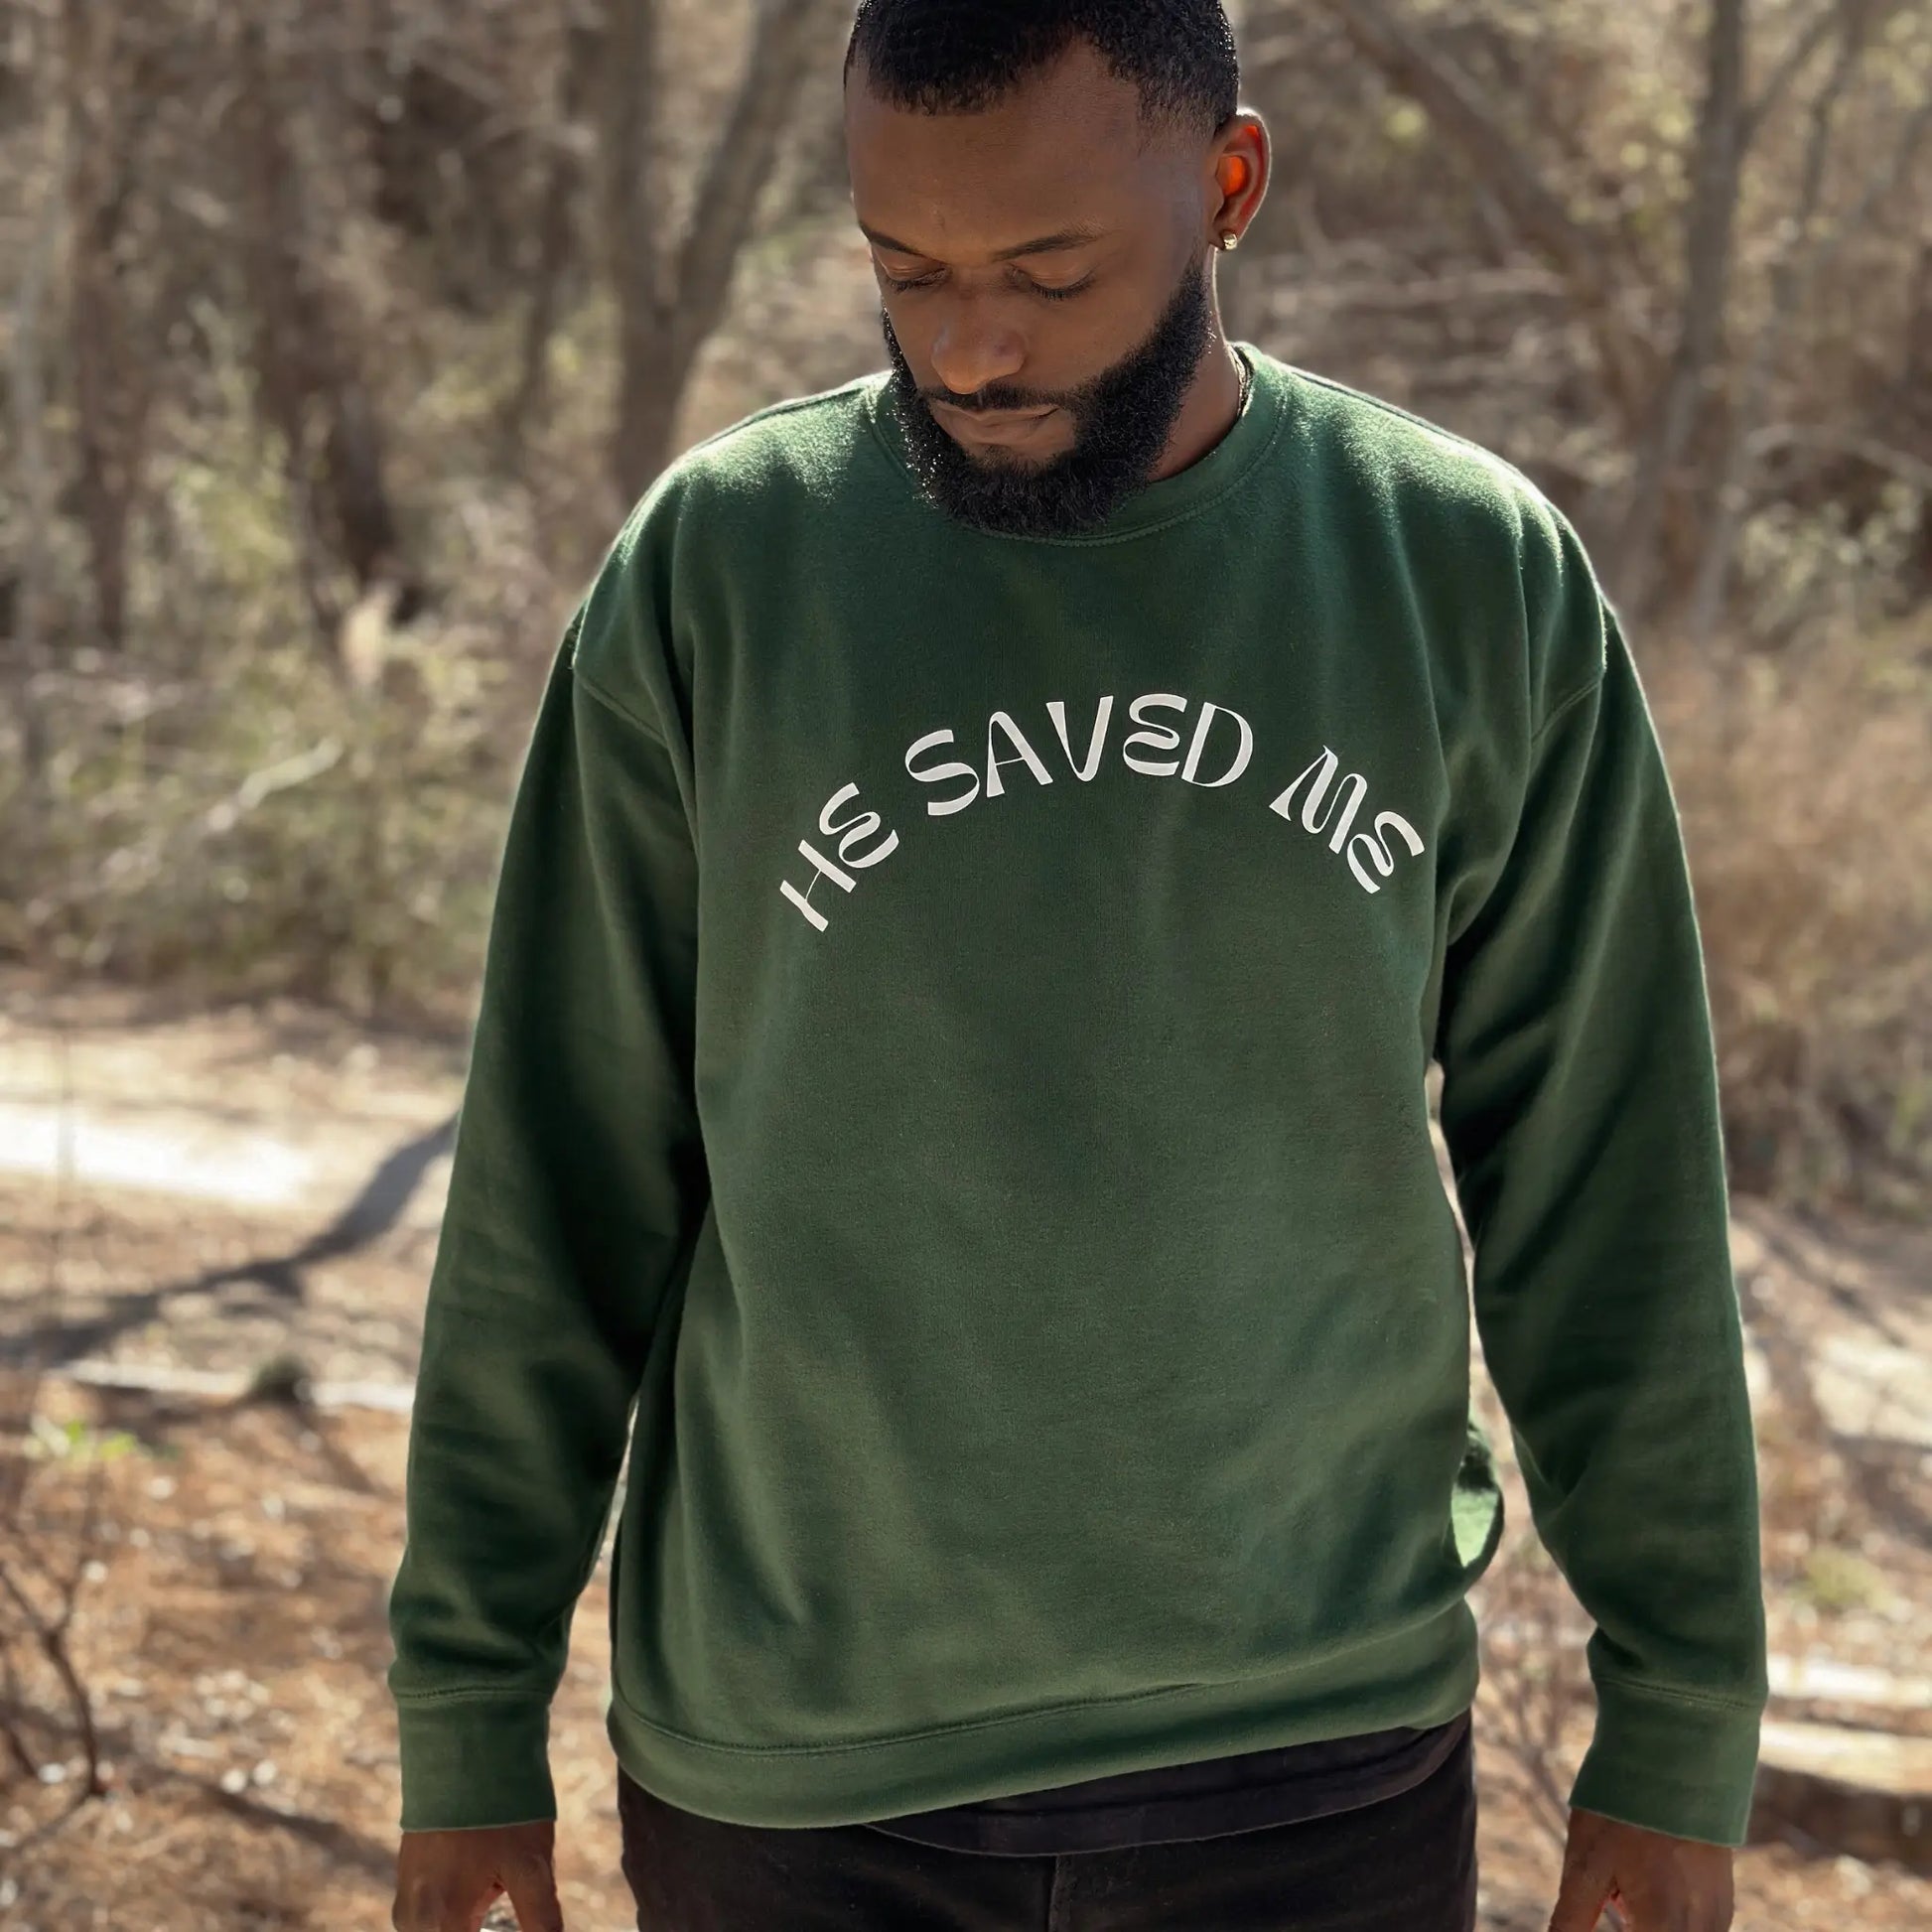 Forest Green premium crew neck sweatshirt. This sweatshirt reads "He Saved Me'" on the front in white letters. The fit is comfy and thick. From Crown of Favor Forrest Green He saved me sweatshirt crewneck. He Saved Me sweatshirt. Christian clothing brand.